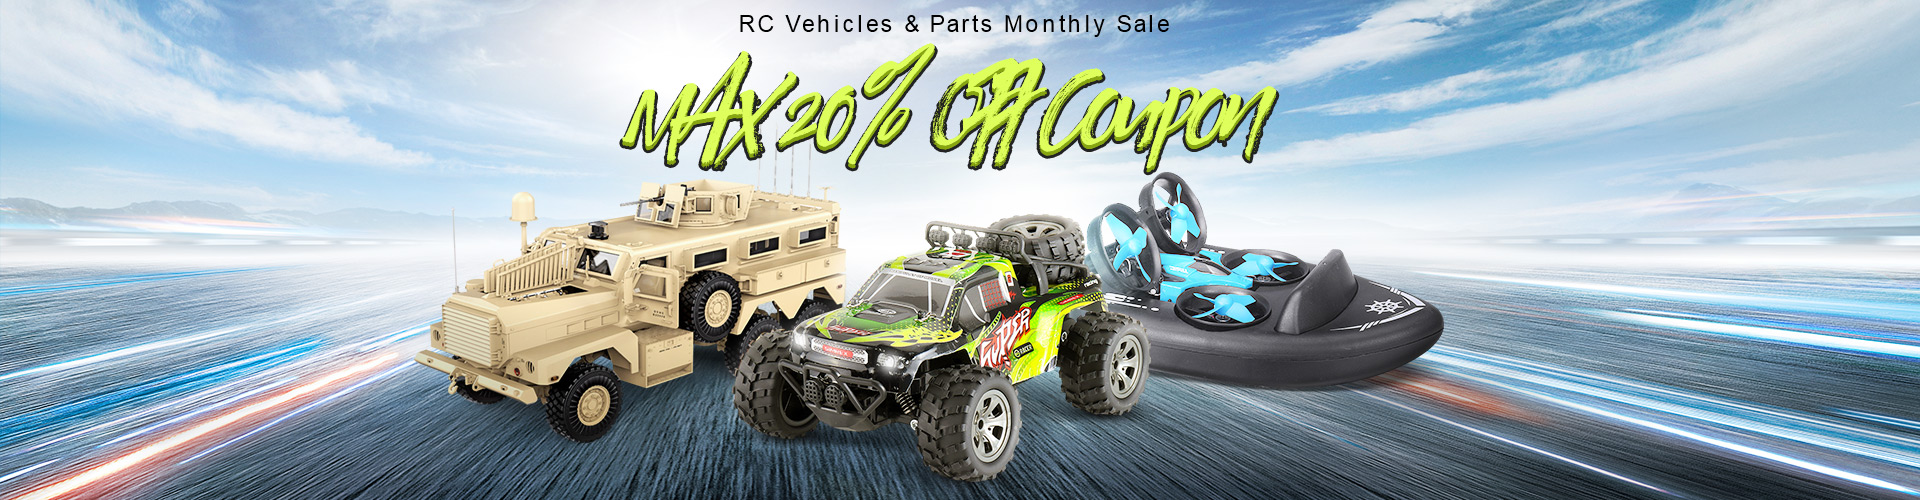 RC Vehicles & Parts Monthly Sale MAX 20% OFF Coupon